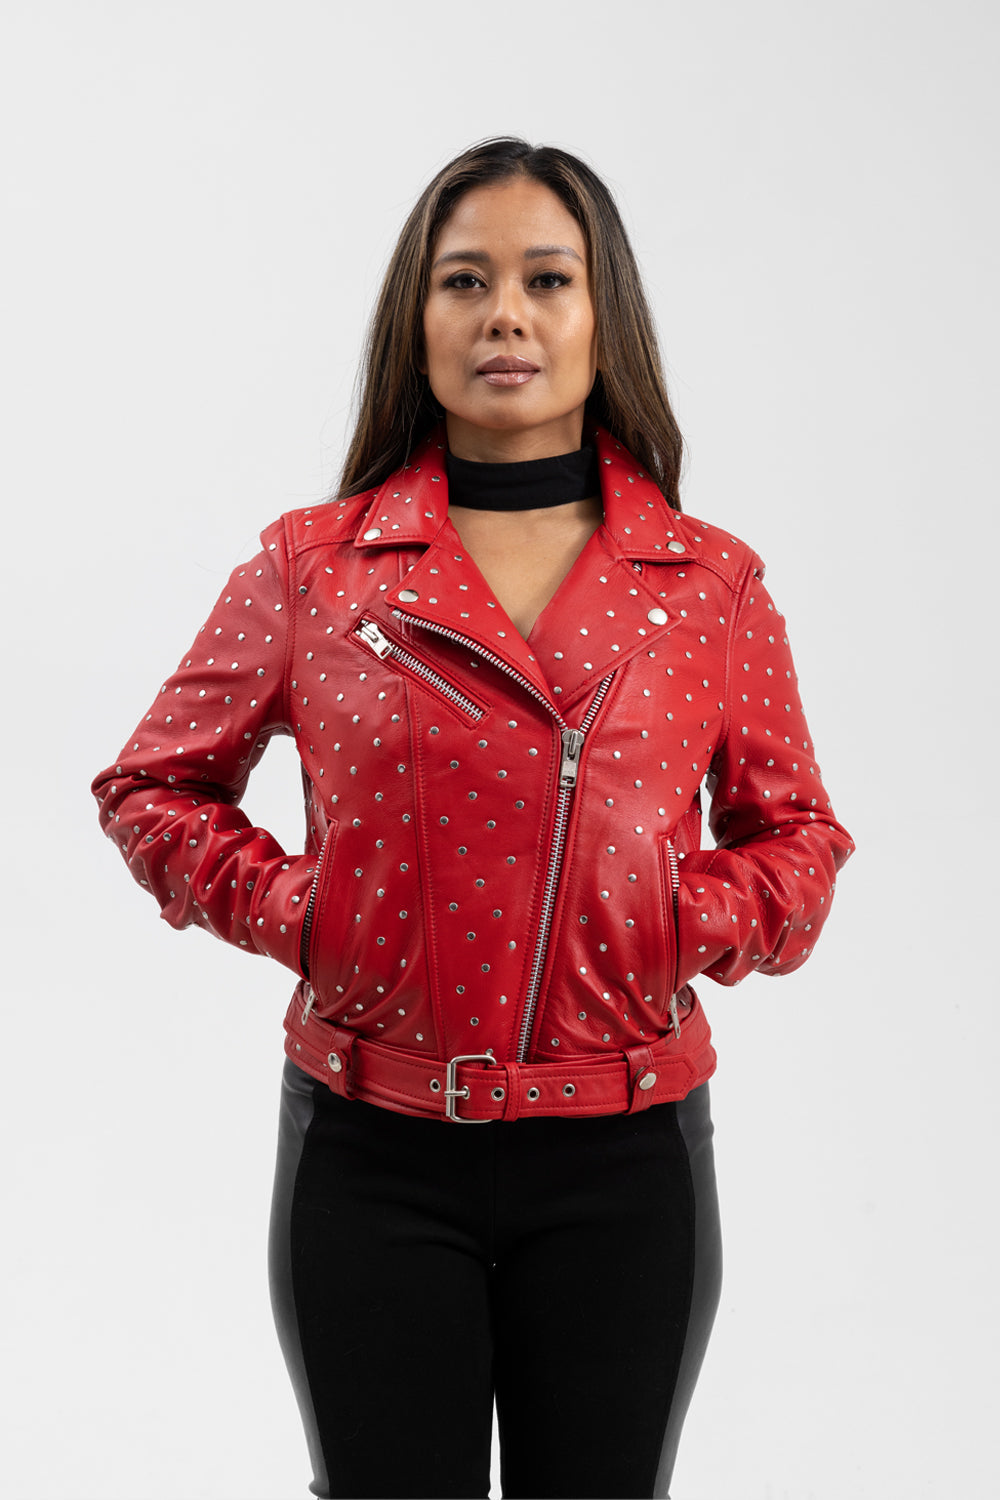 Claudia Womens Fashion Leather Jacket Fire Red Women's Leather Jacket Whet Blu NYC   